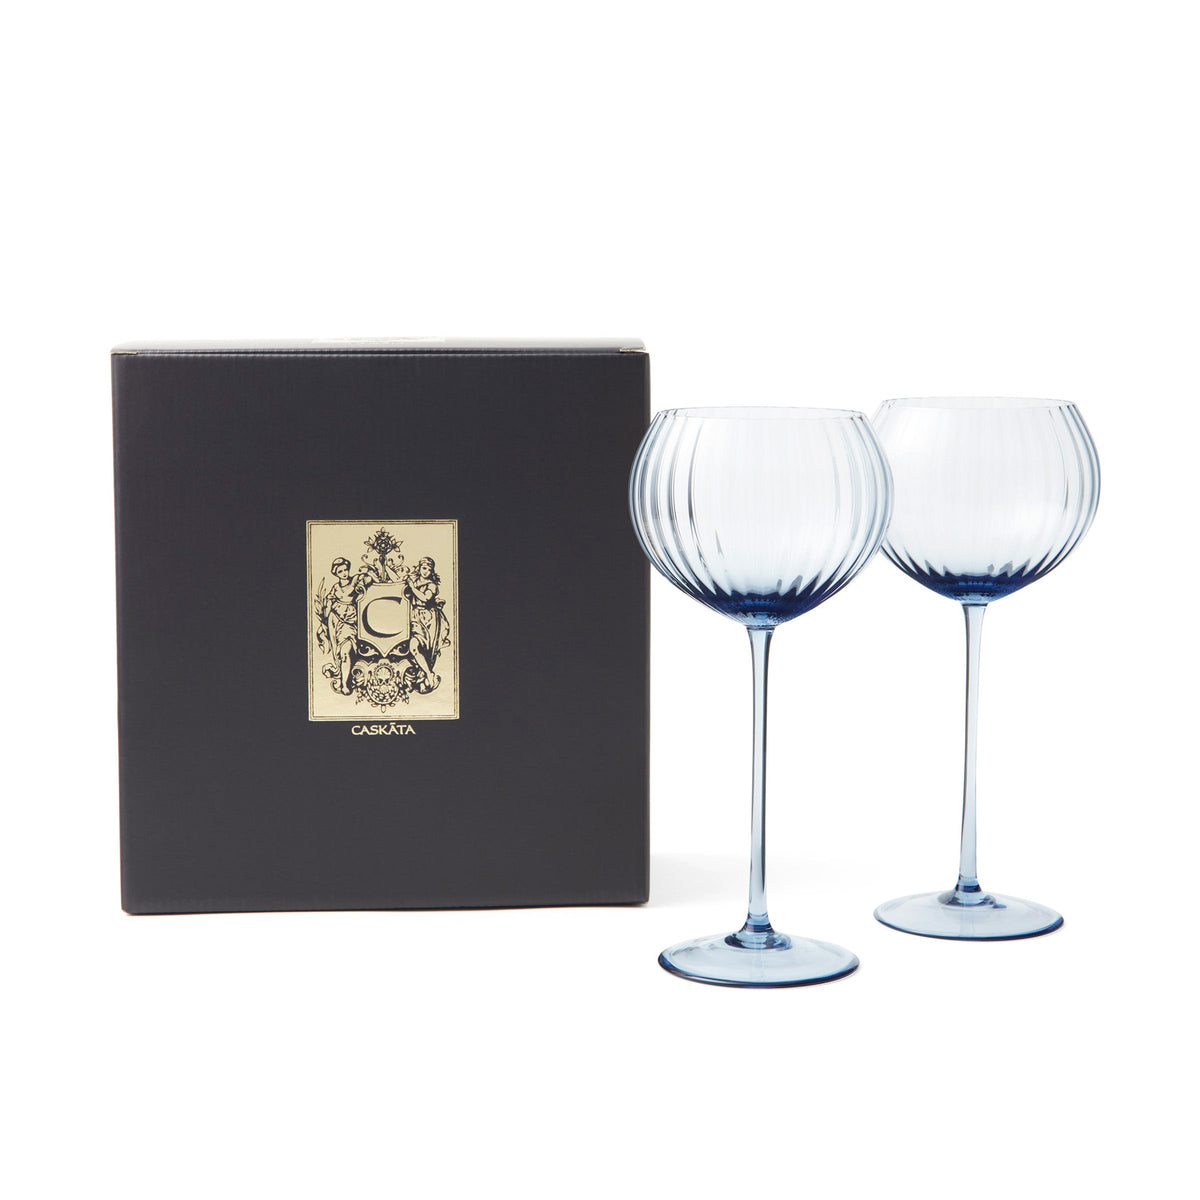 Quinn Ocean Blue Mouth-Blown Red Wine Glasses with gold and black gift box from Caskata 